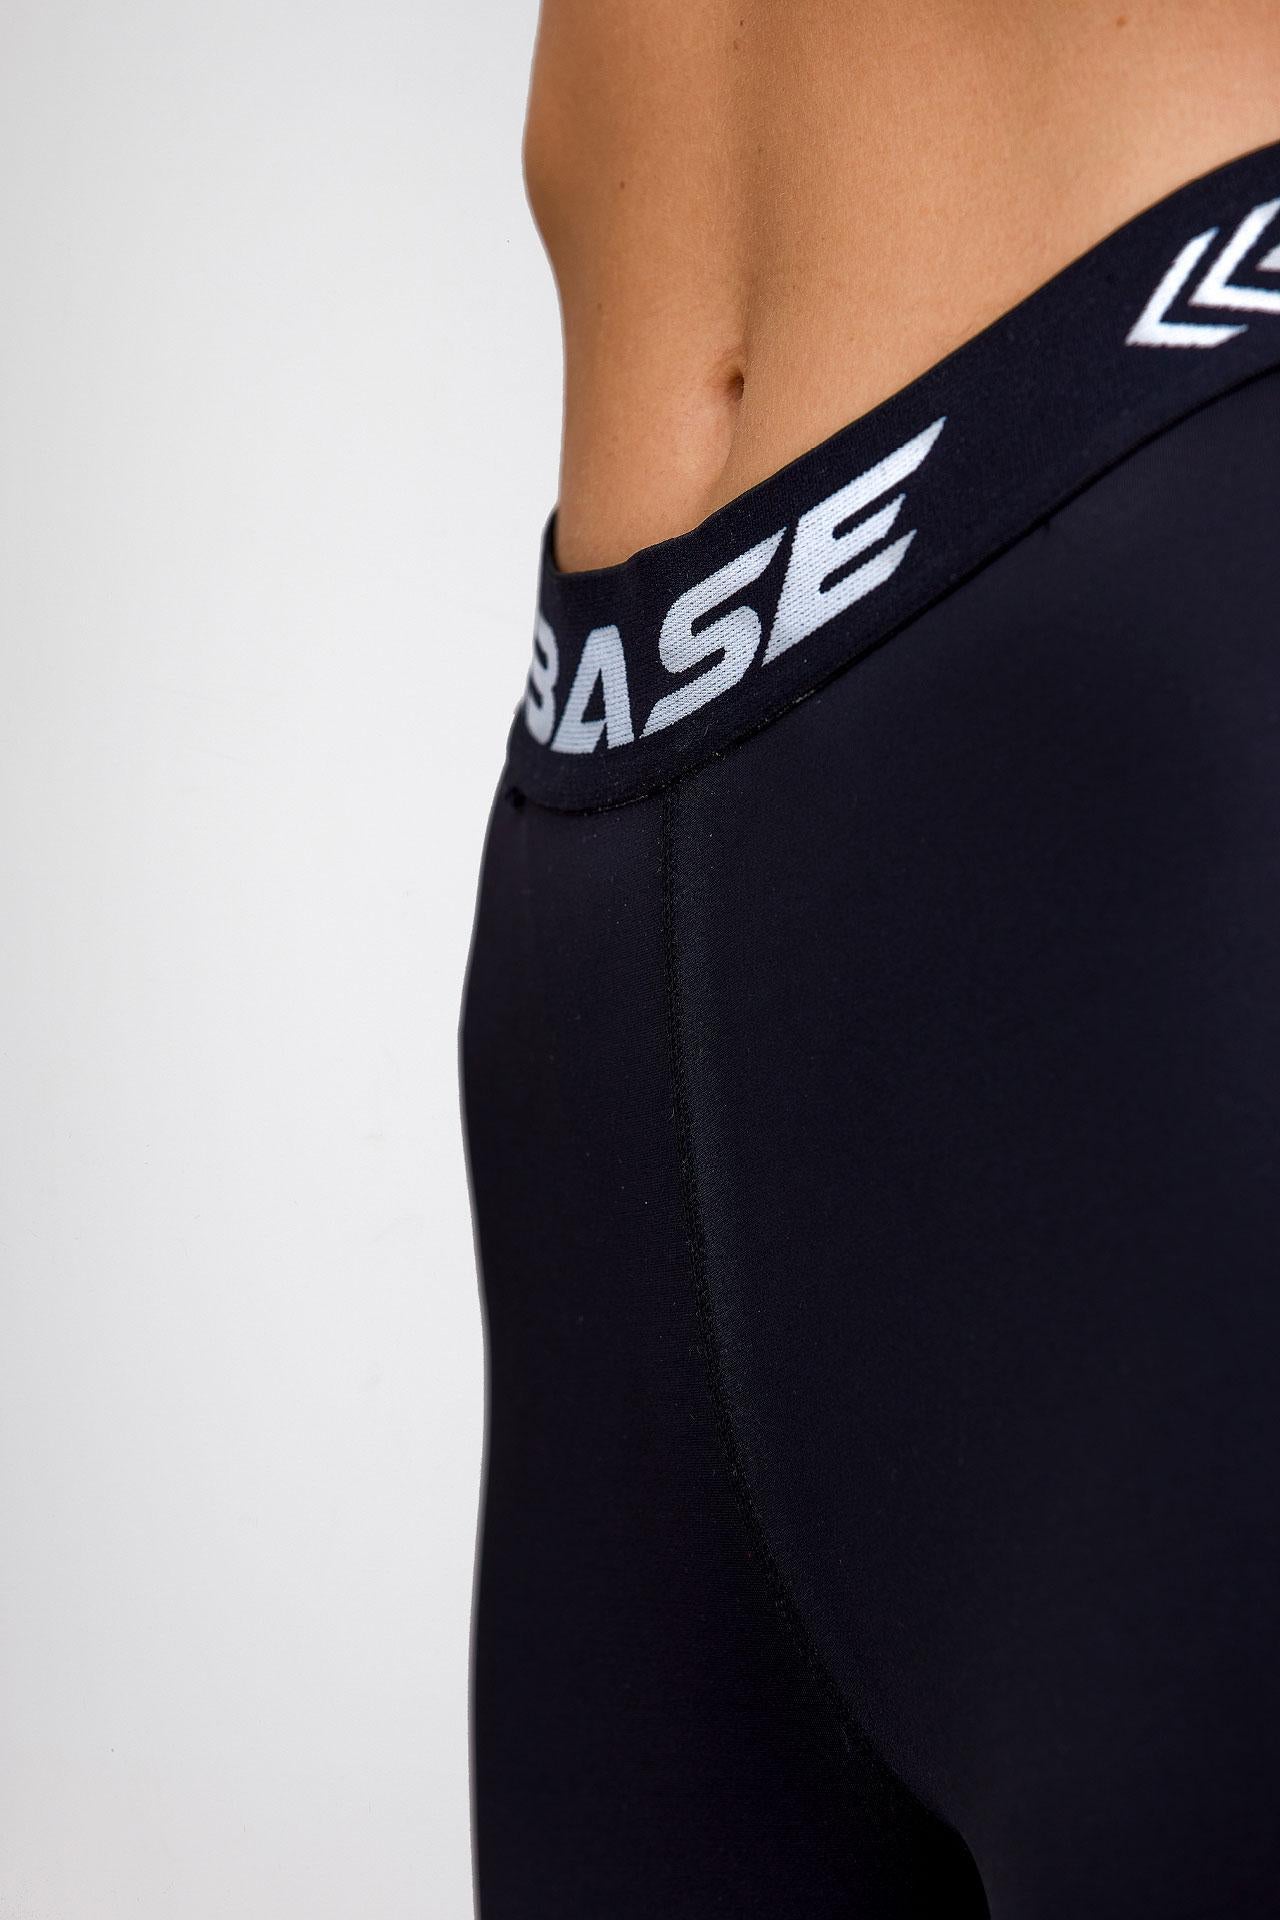 BASE 7/8 Women's Compression Tights - Black - Adelaide 36ers